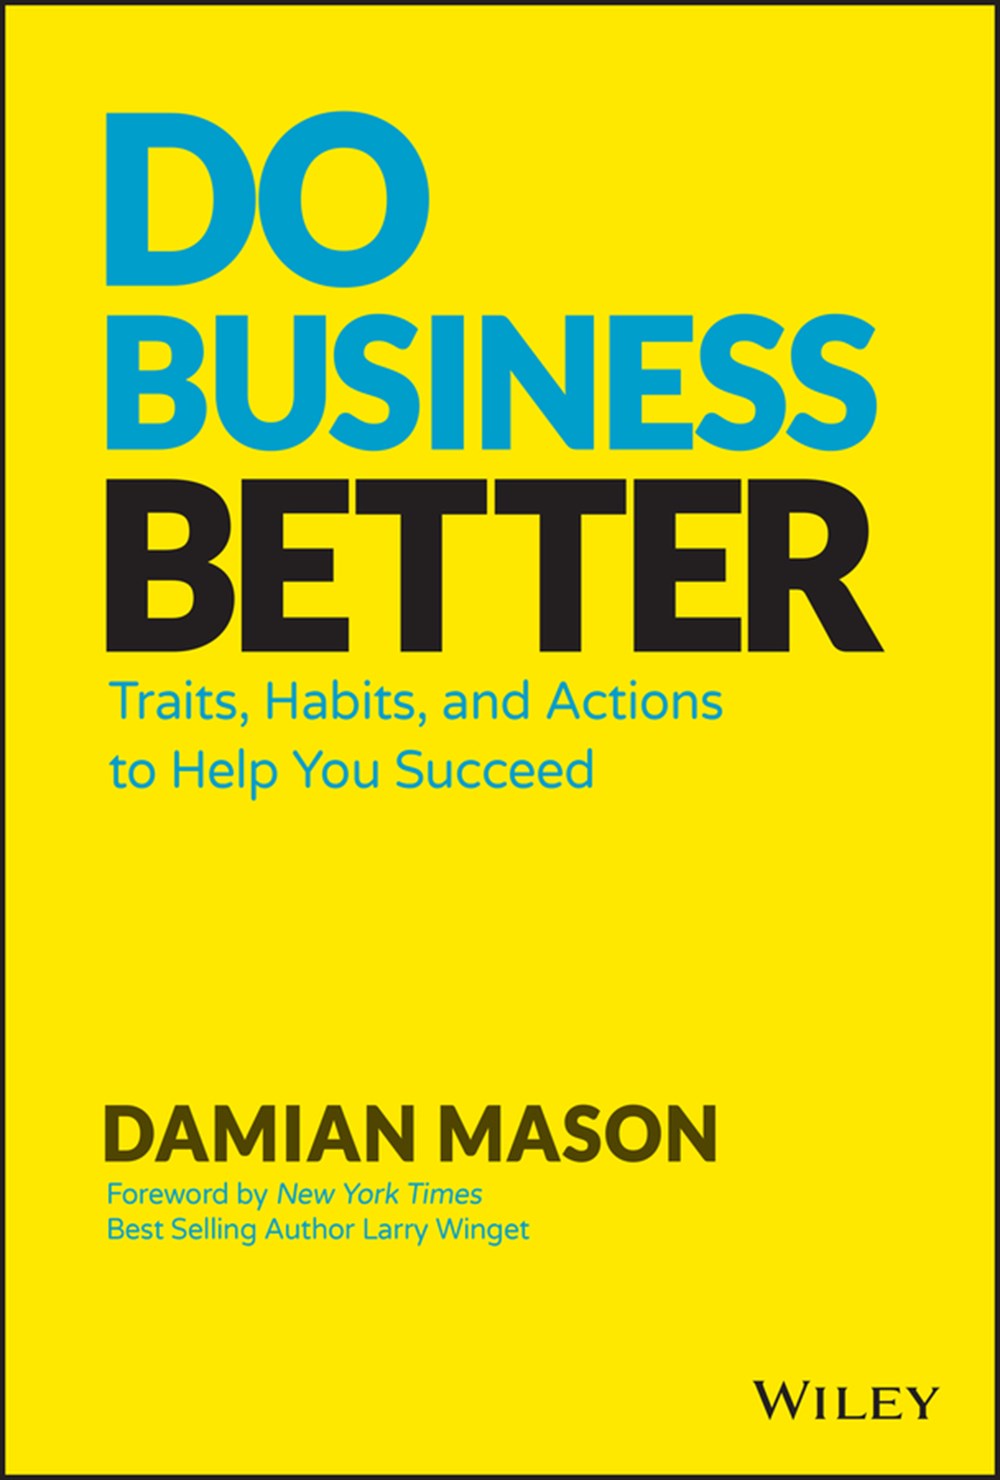 Do Business Better Traits, Habits, and Actions to Help You Succeed